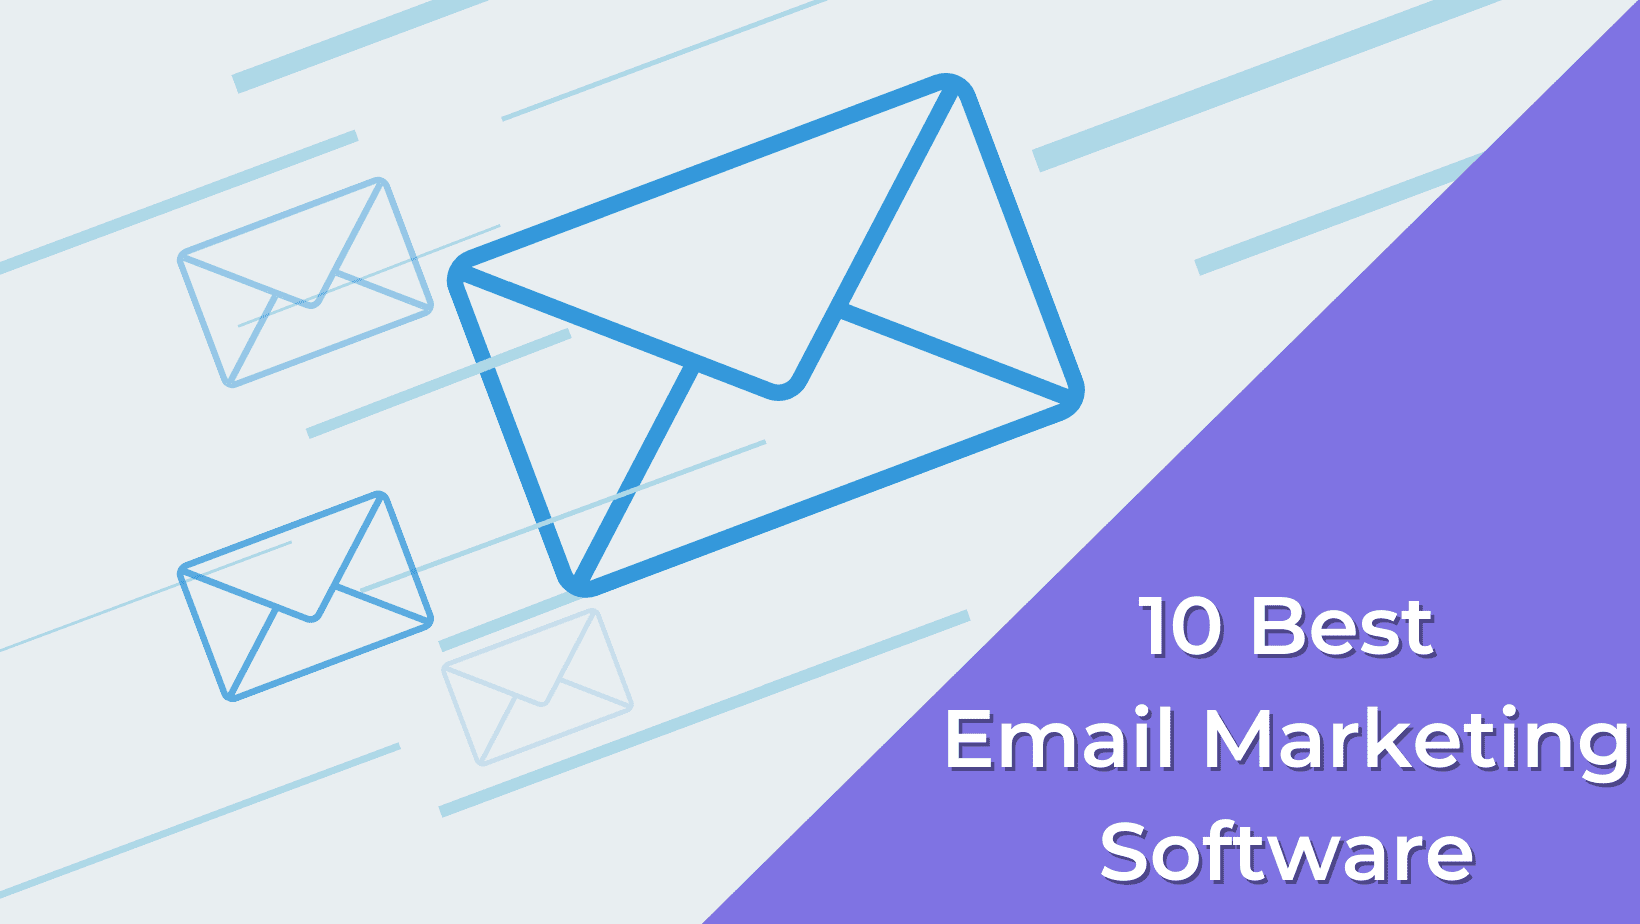 Email logo representing an email marketing software sending newsletters to subscribers